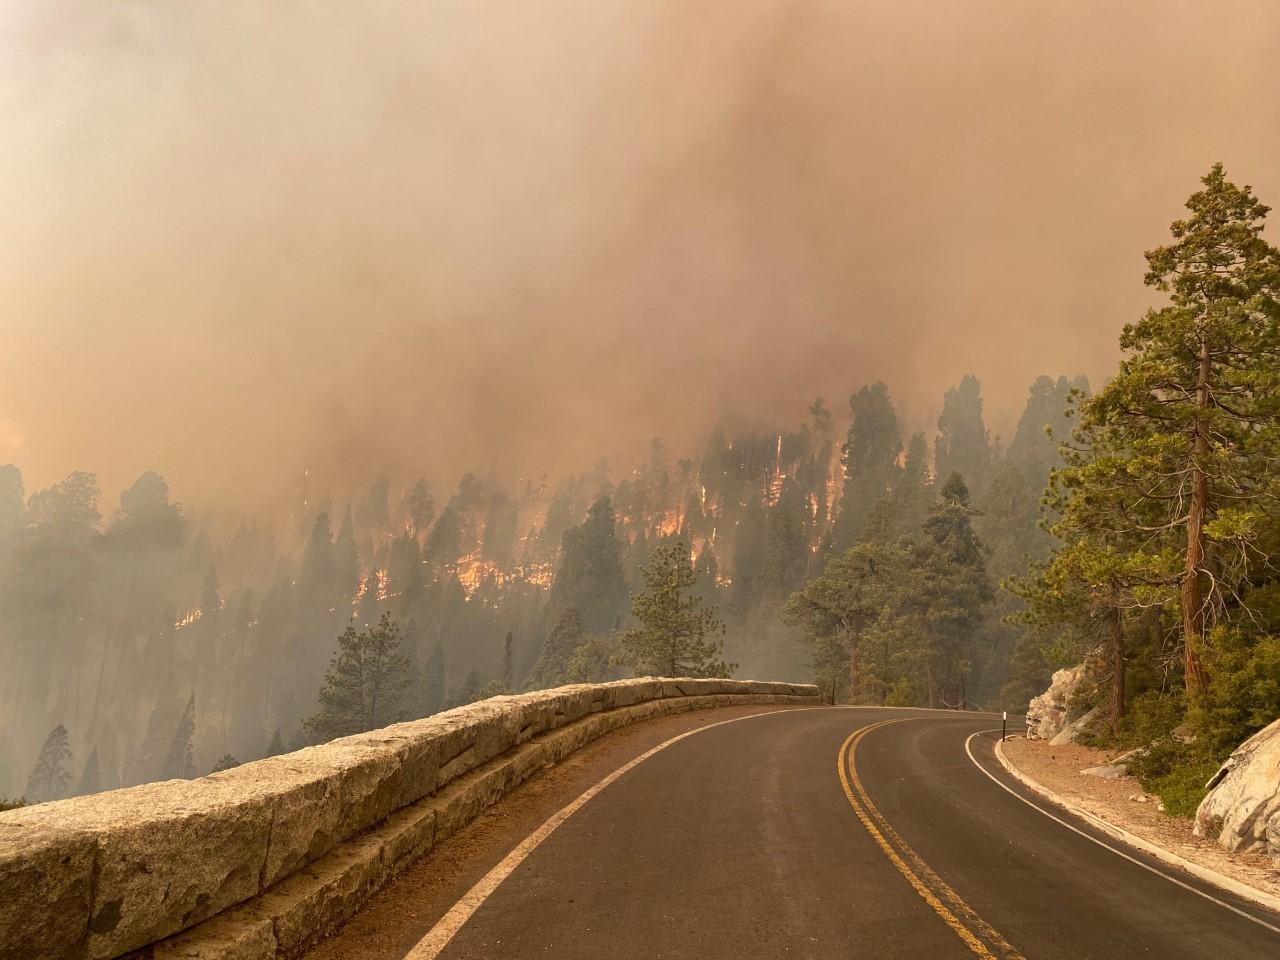 A paved roads leads towards open flames on a smoky day